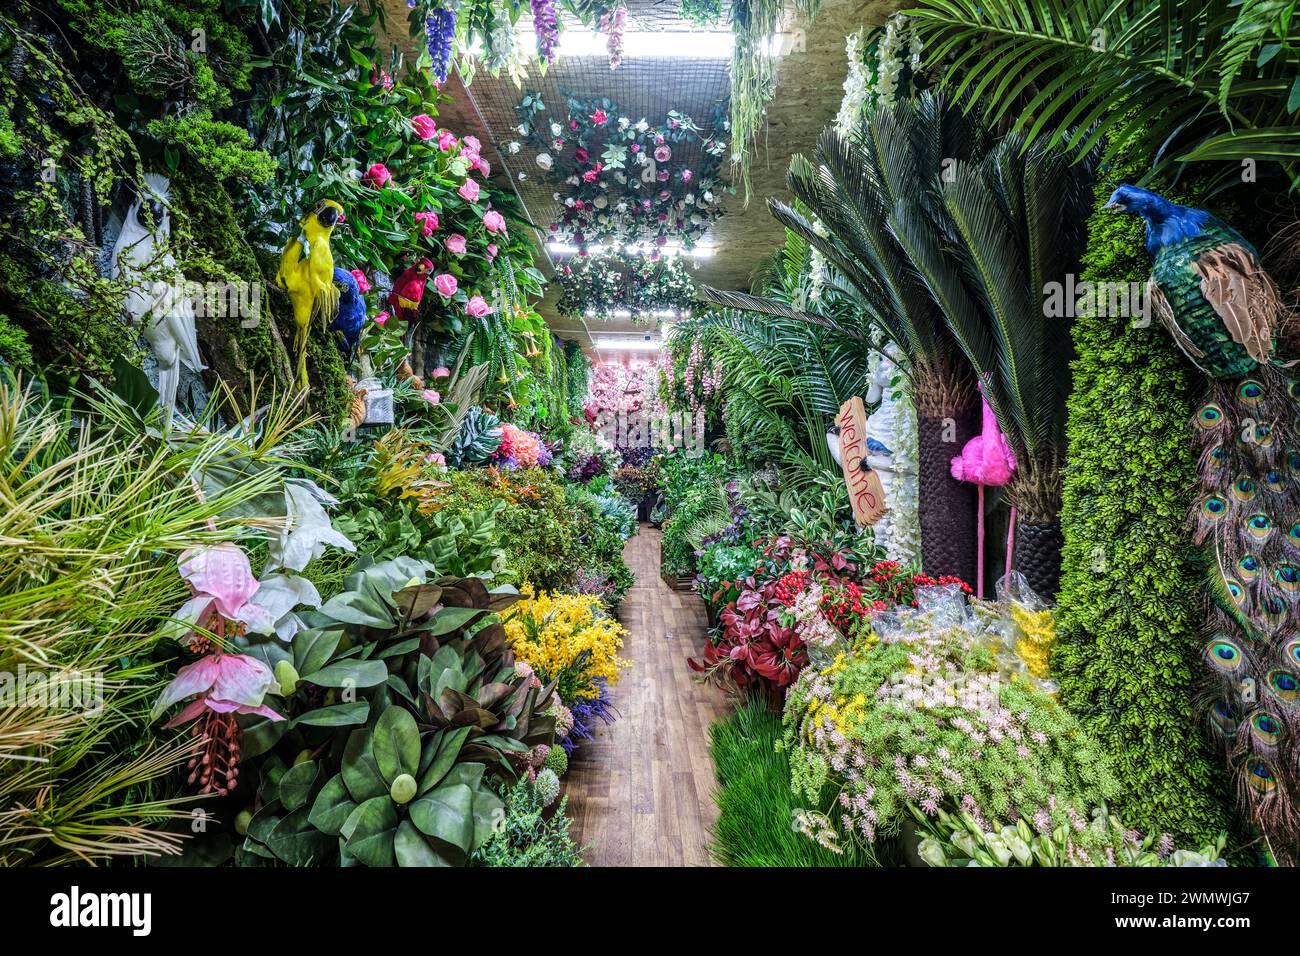 A view inside a shop that sells artificial, plastic, fake plants, flowers, birds, ferns. At the Barakholka shipping container local market in Almaty, Stock Photo